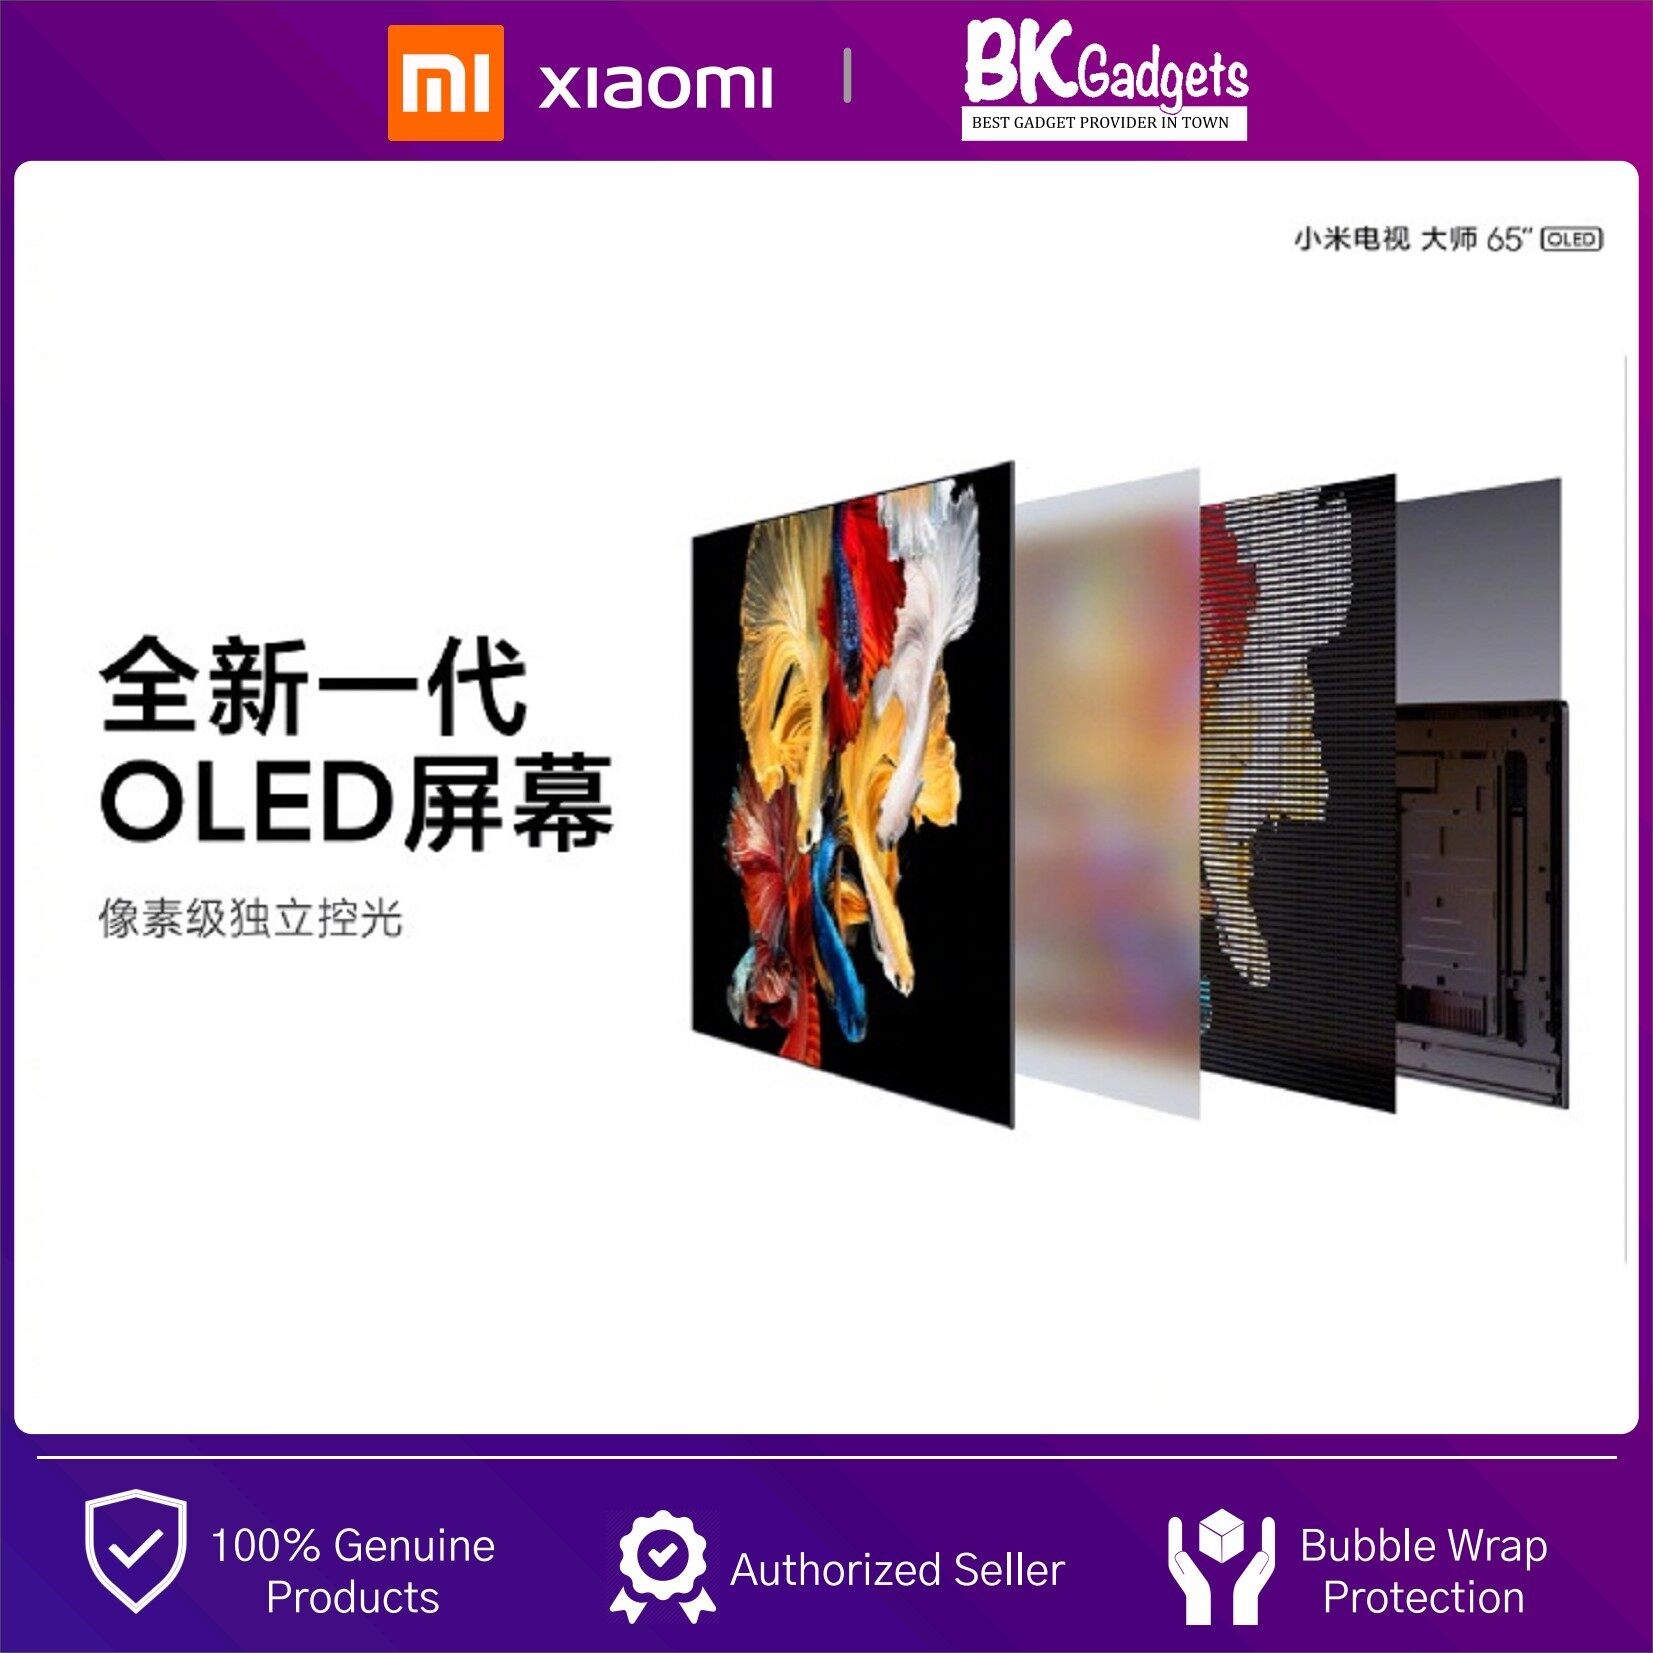 XiaoMi LED Smart TV Master Series 65" OLED 4K UltraHD [ Chinese Version ] - Cinematic Surround Sound | 120Hz OLED Screen | Dolby Audio | Dolby Atmos | DTS-HD | 1 Year Malaysia Warranty